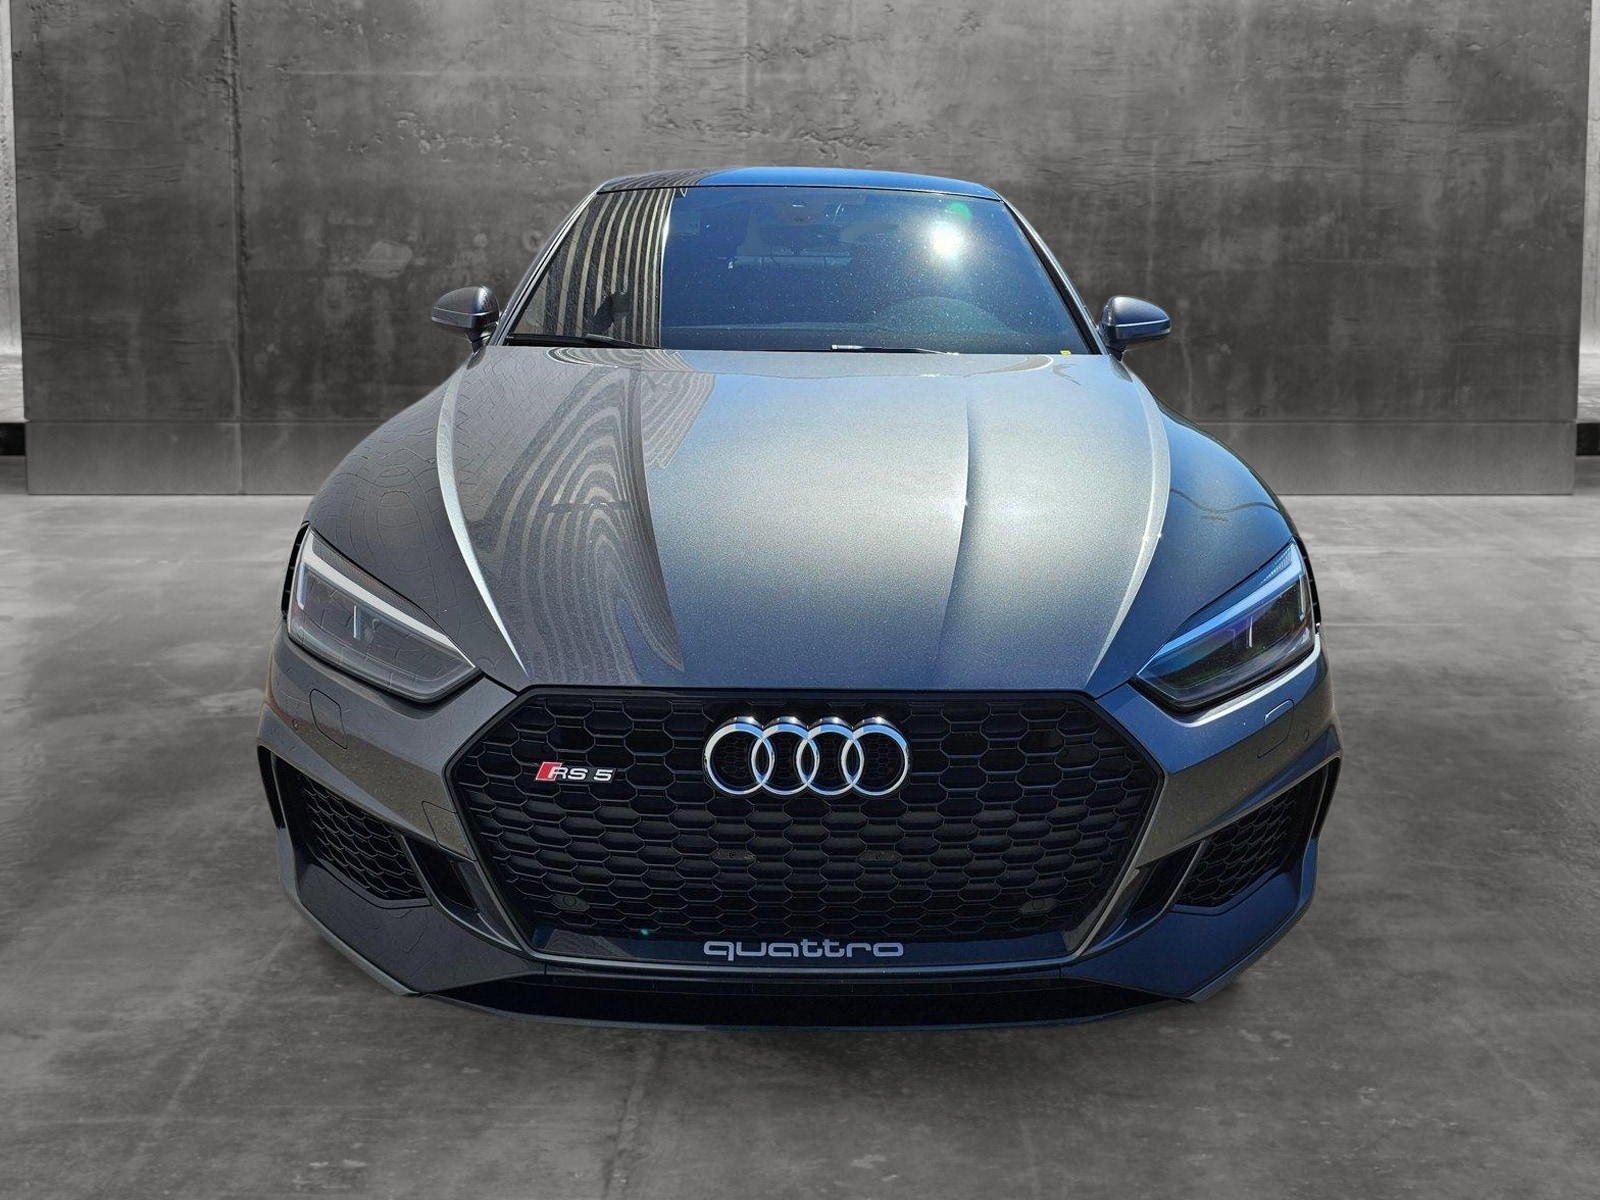 Used 2018 Audi RS 5 Base with VIN WUAPWAF53JA902212 for sale in Renton, WA